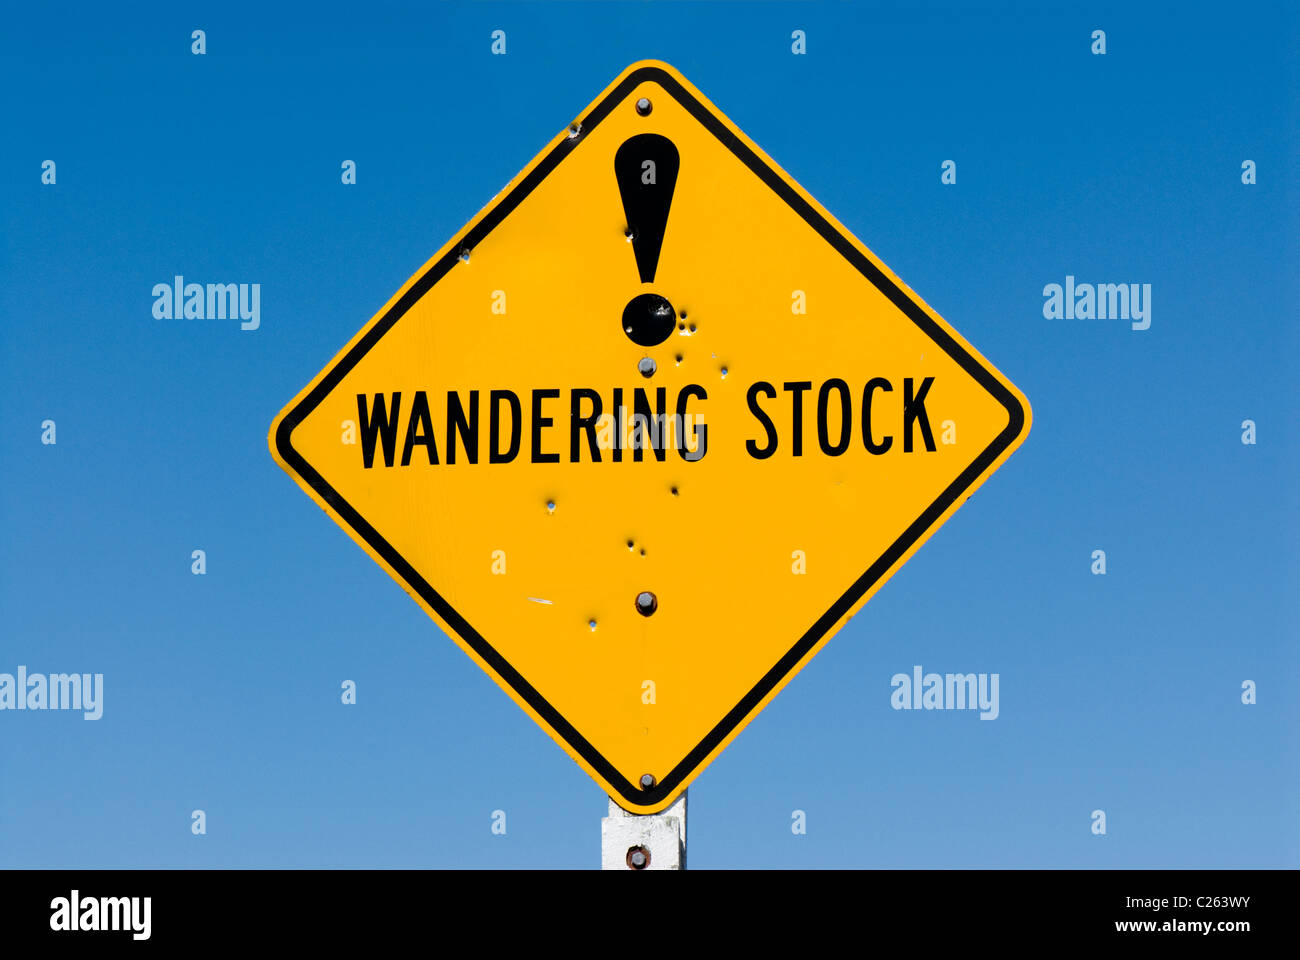 Wandering stock warning sign with exclamation mark and bullet holes Stock Photo